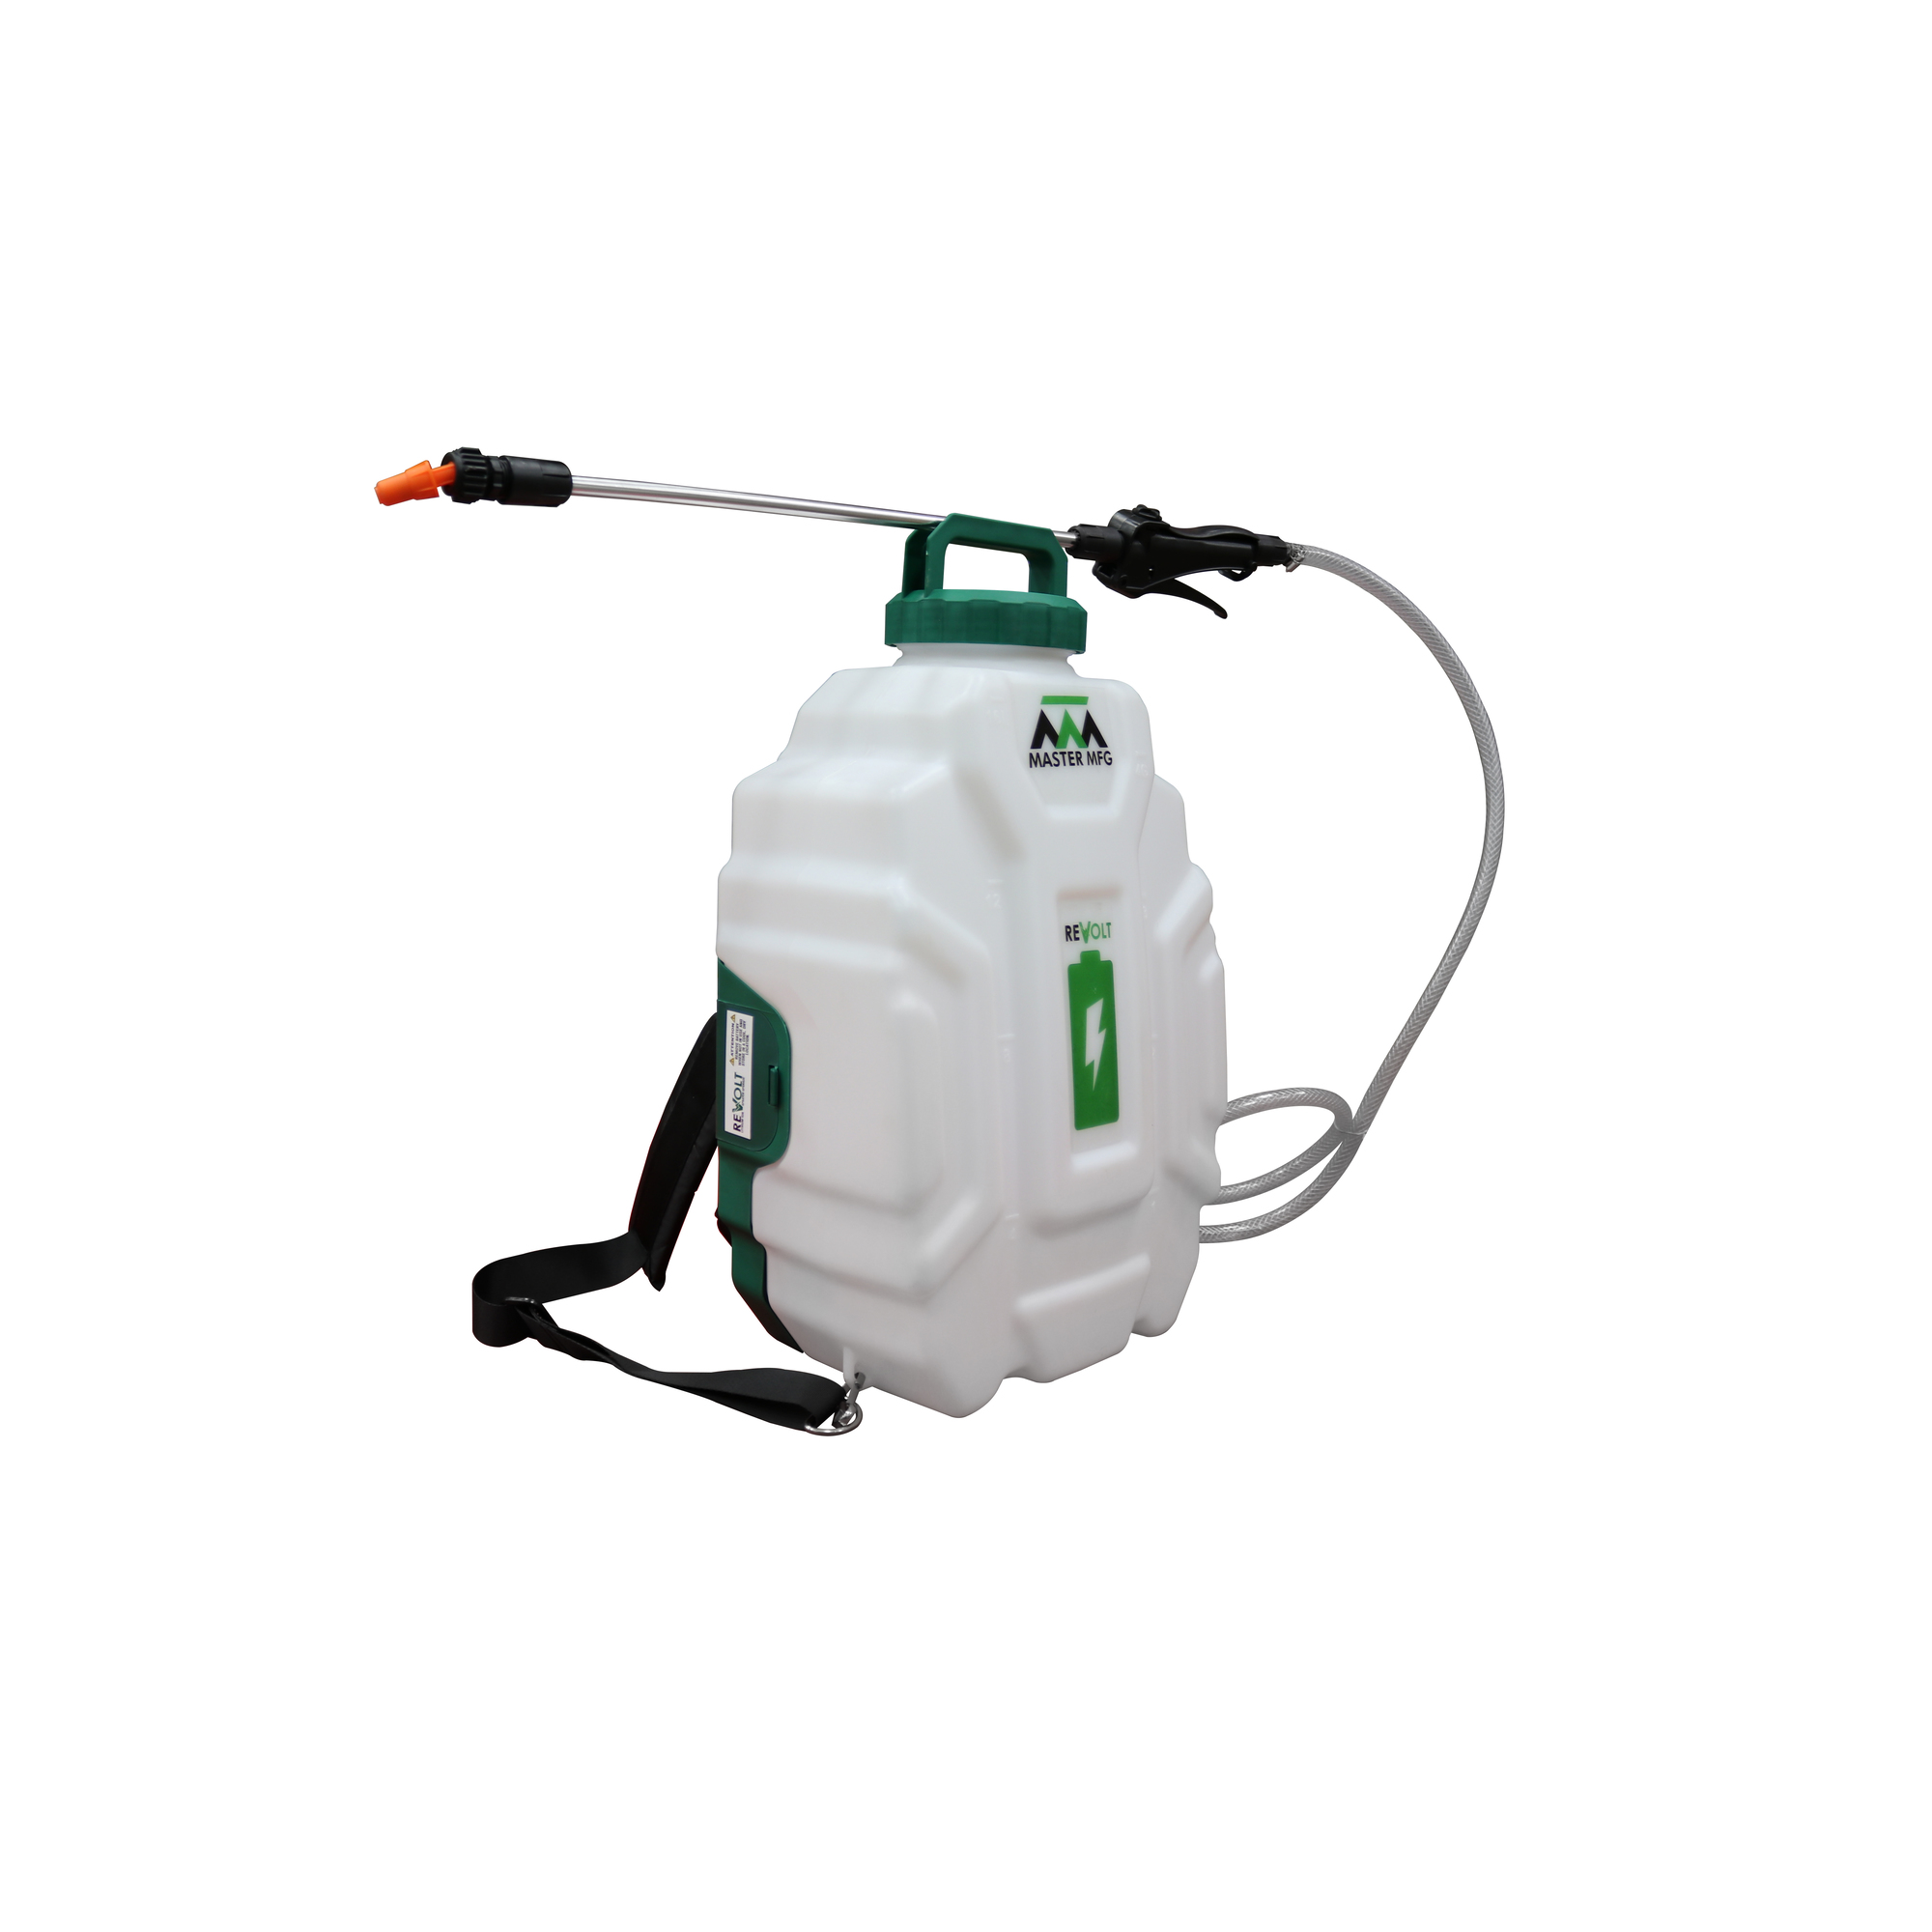 Master MFG, 14.4V Lithium-Ion 4-Gal Backpack Sprayer - 1.0GPM, Tank Size 4 Gal, Flow 1 GPM, Pressure 40 PSI, Model BPS-REV401